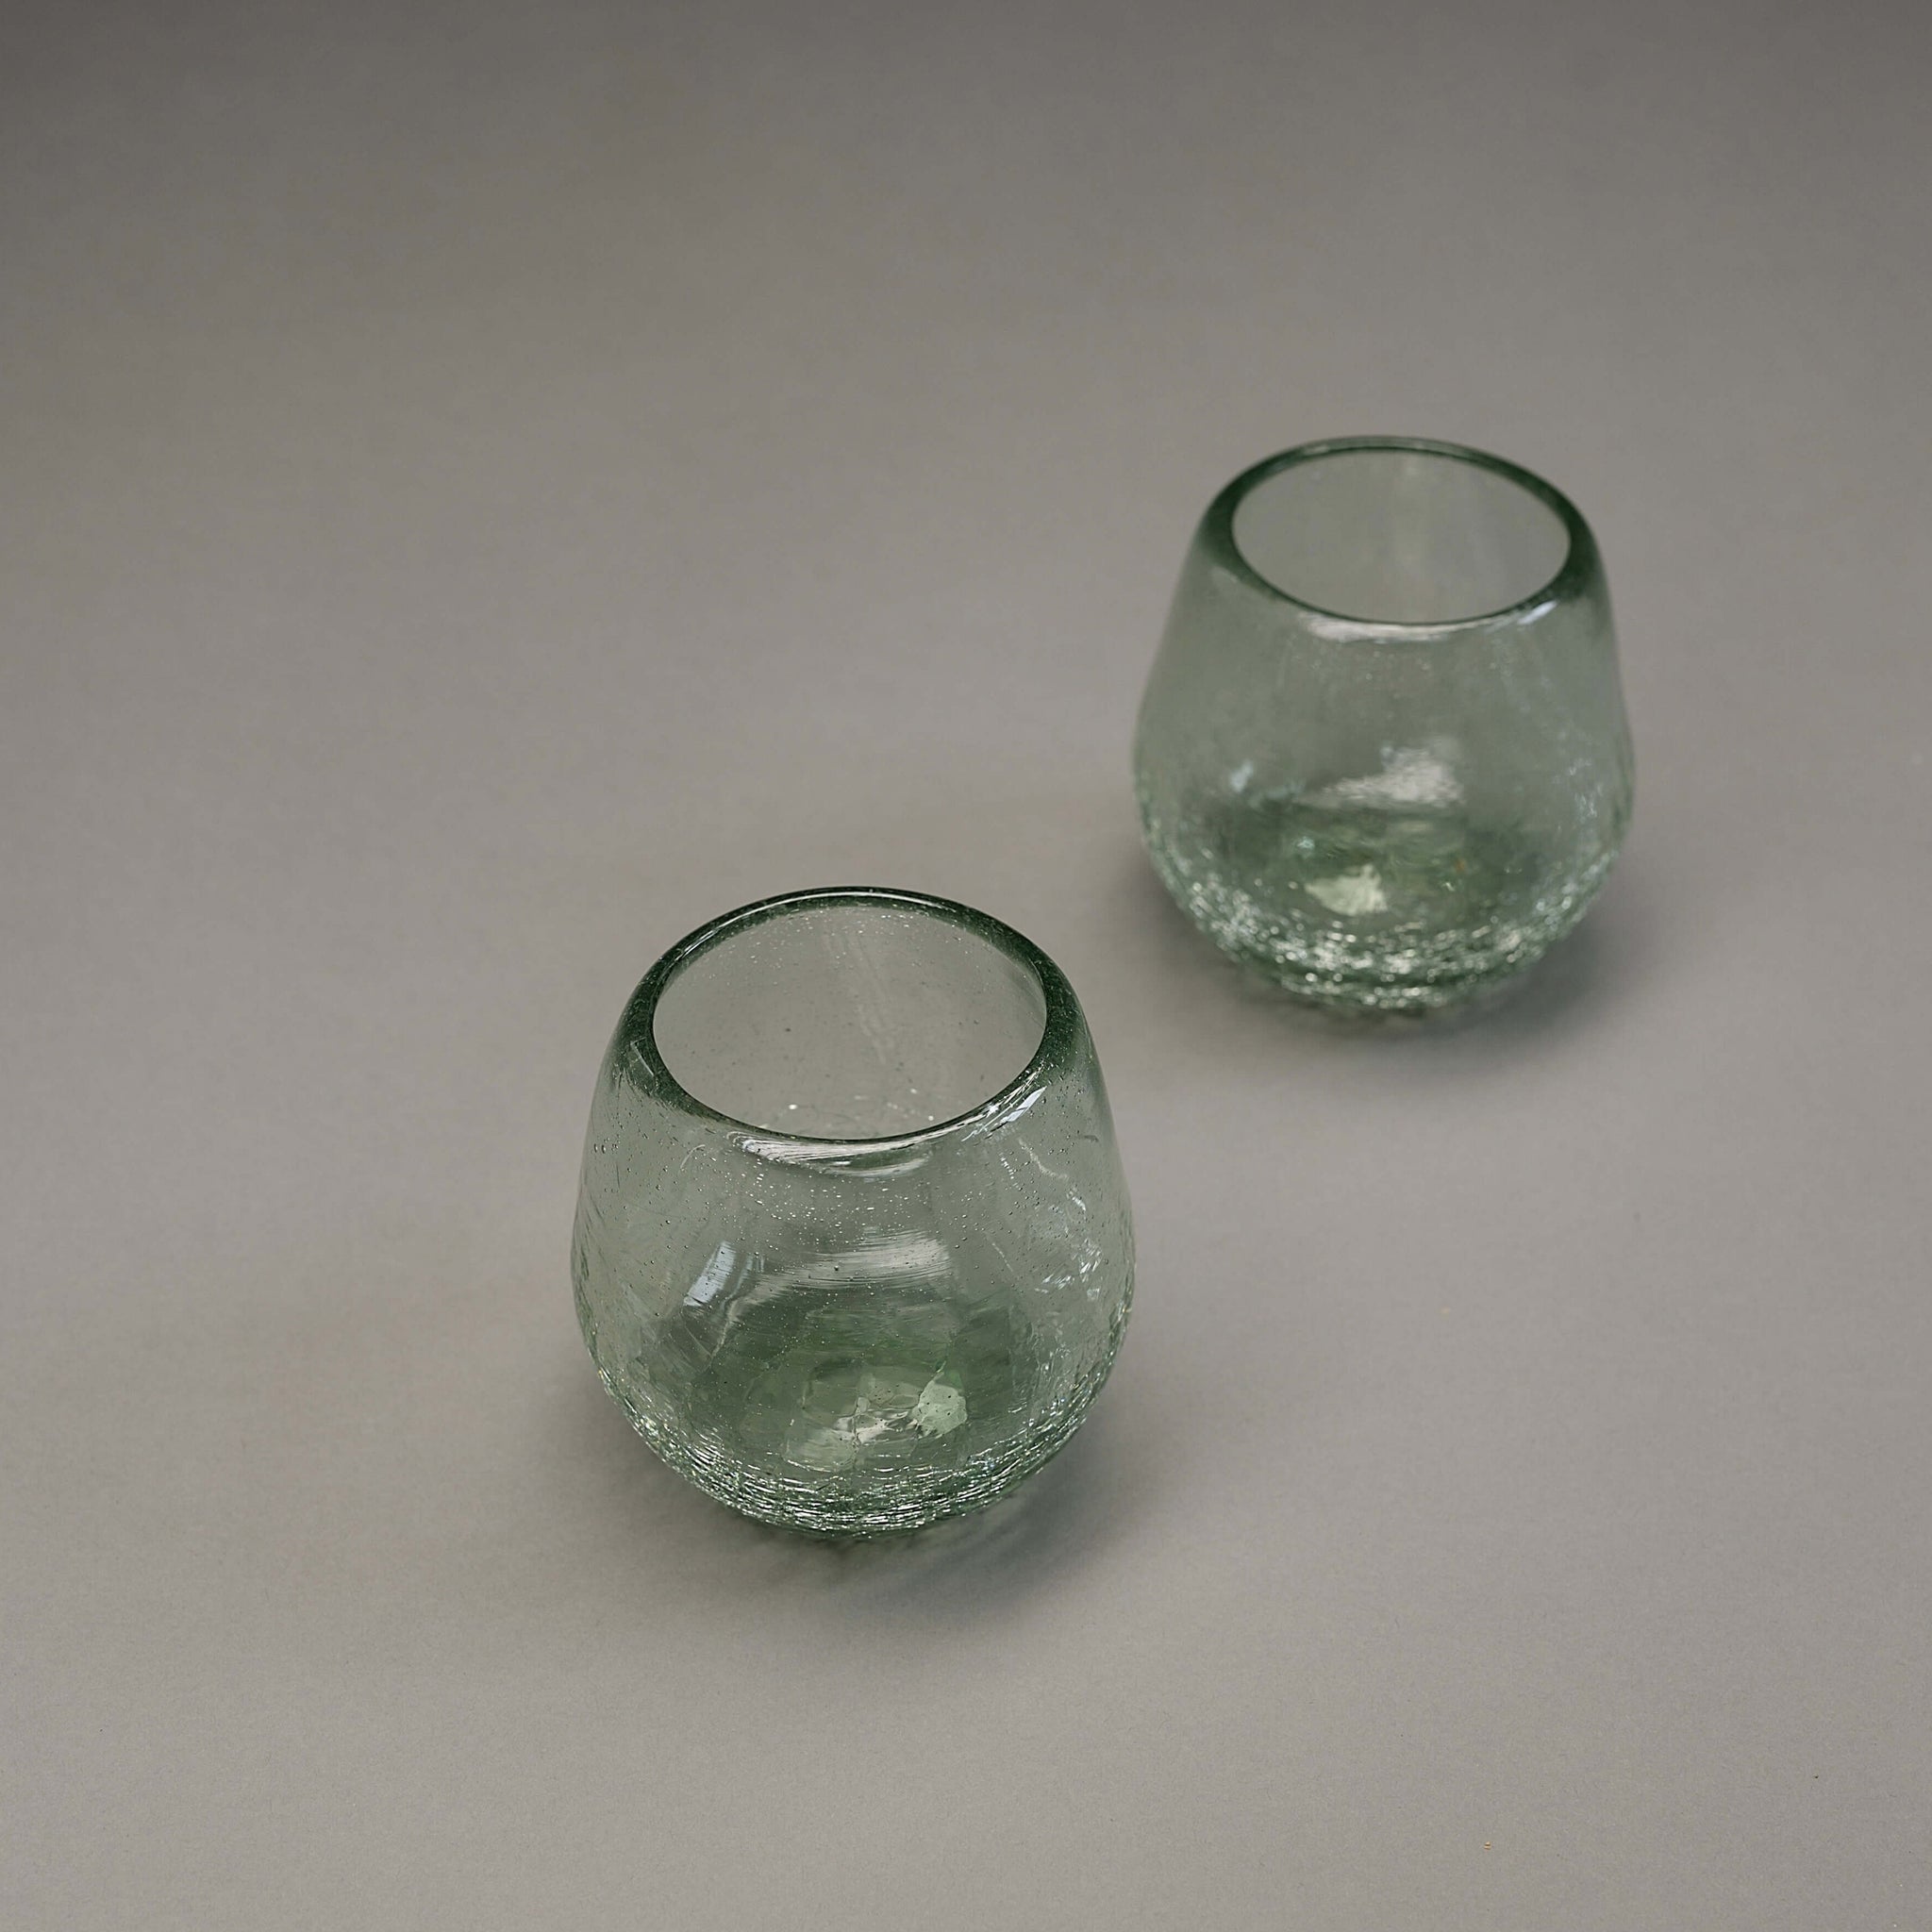 Stemless wine glasses featuring a crackle effect.